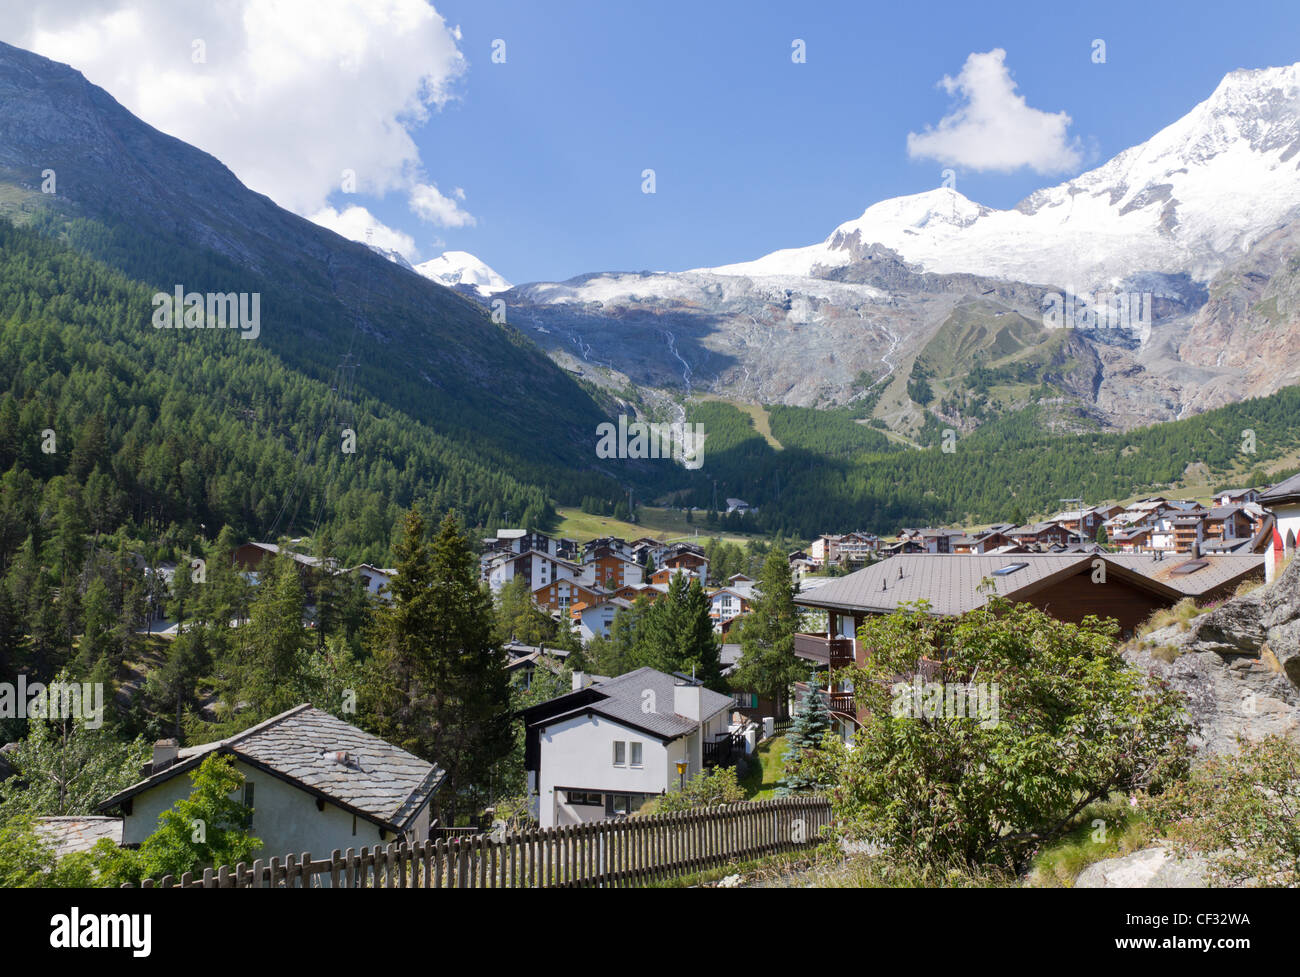 Alpine town of Saas Fee in Saas valley surrounded by high mountains, Vailais, Switzerland Stock Photo